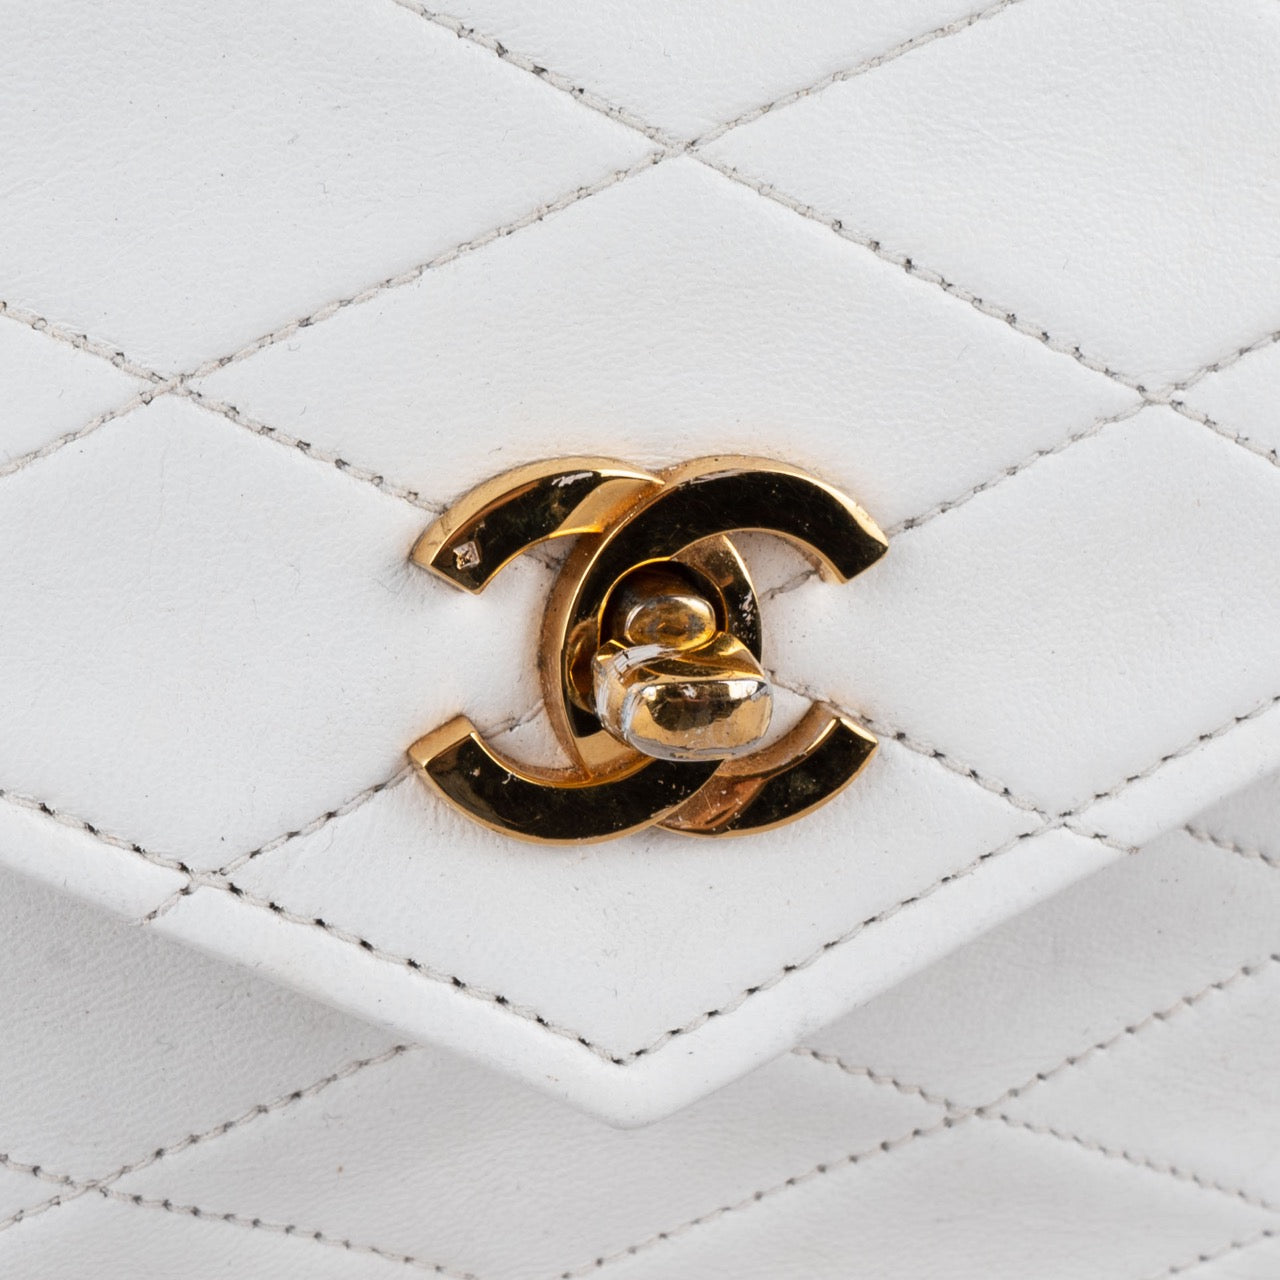 Chanel Quilted Lambskin Single Flap Bag